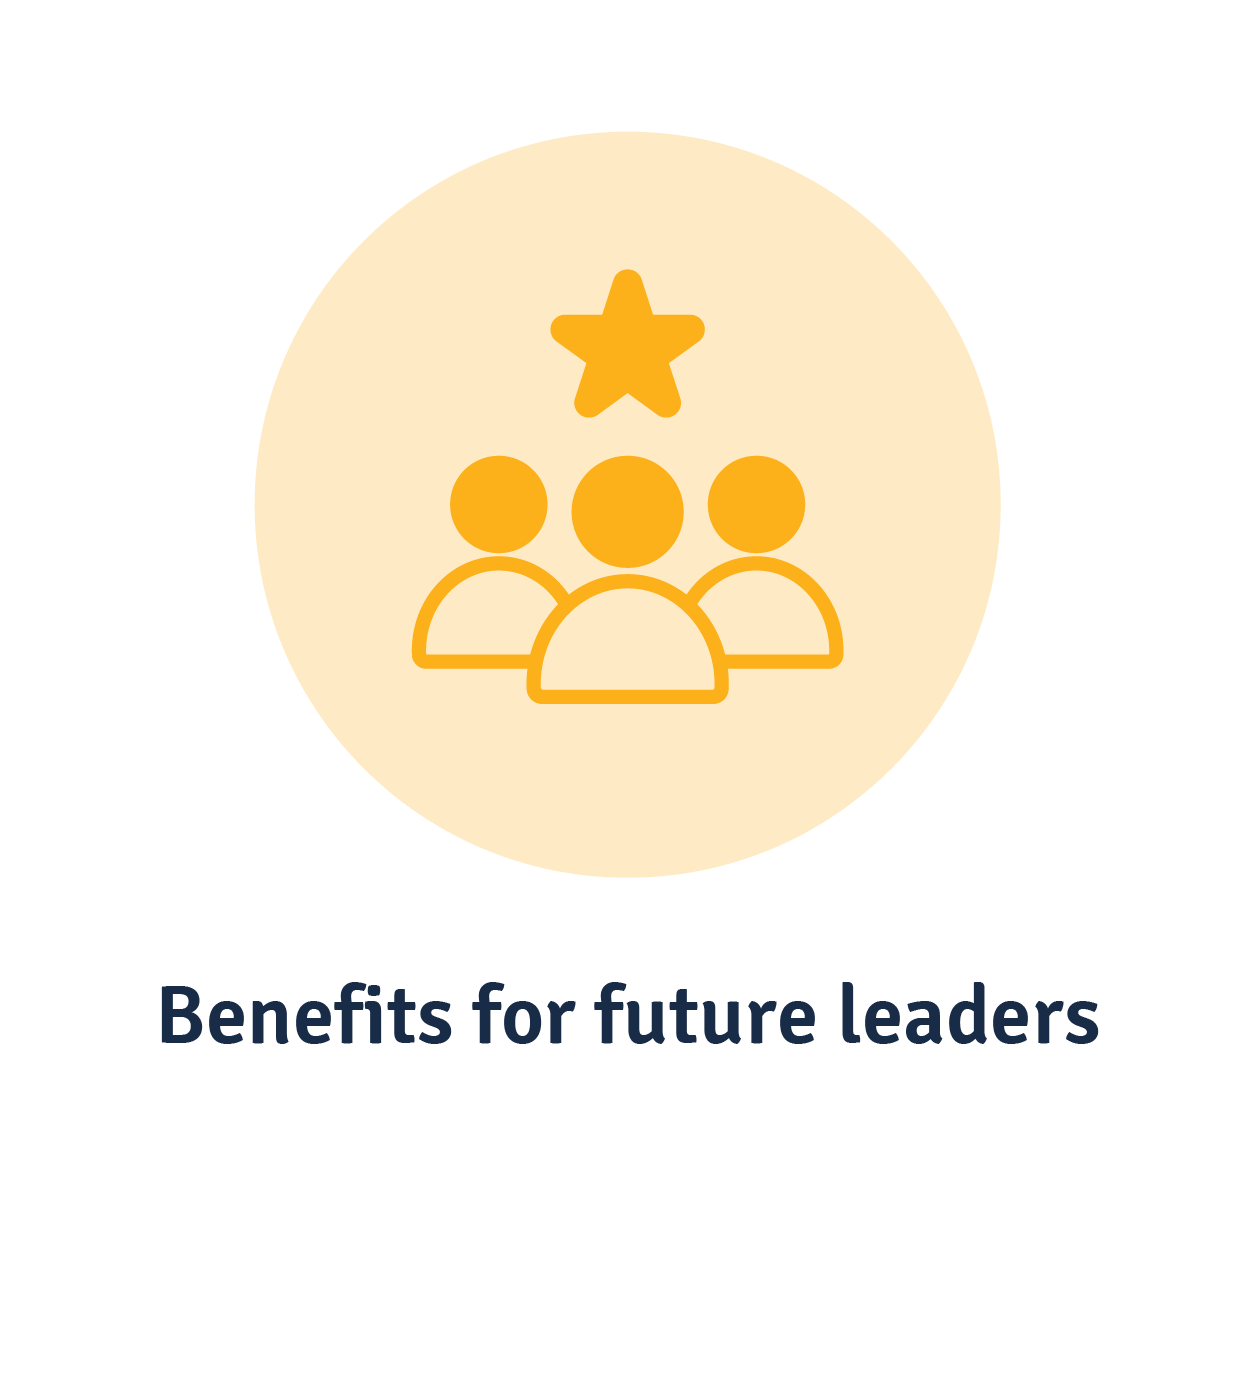 Cohort-based learning benefits for future leaders